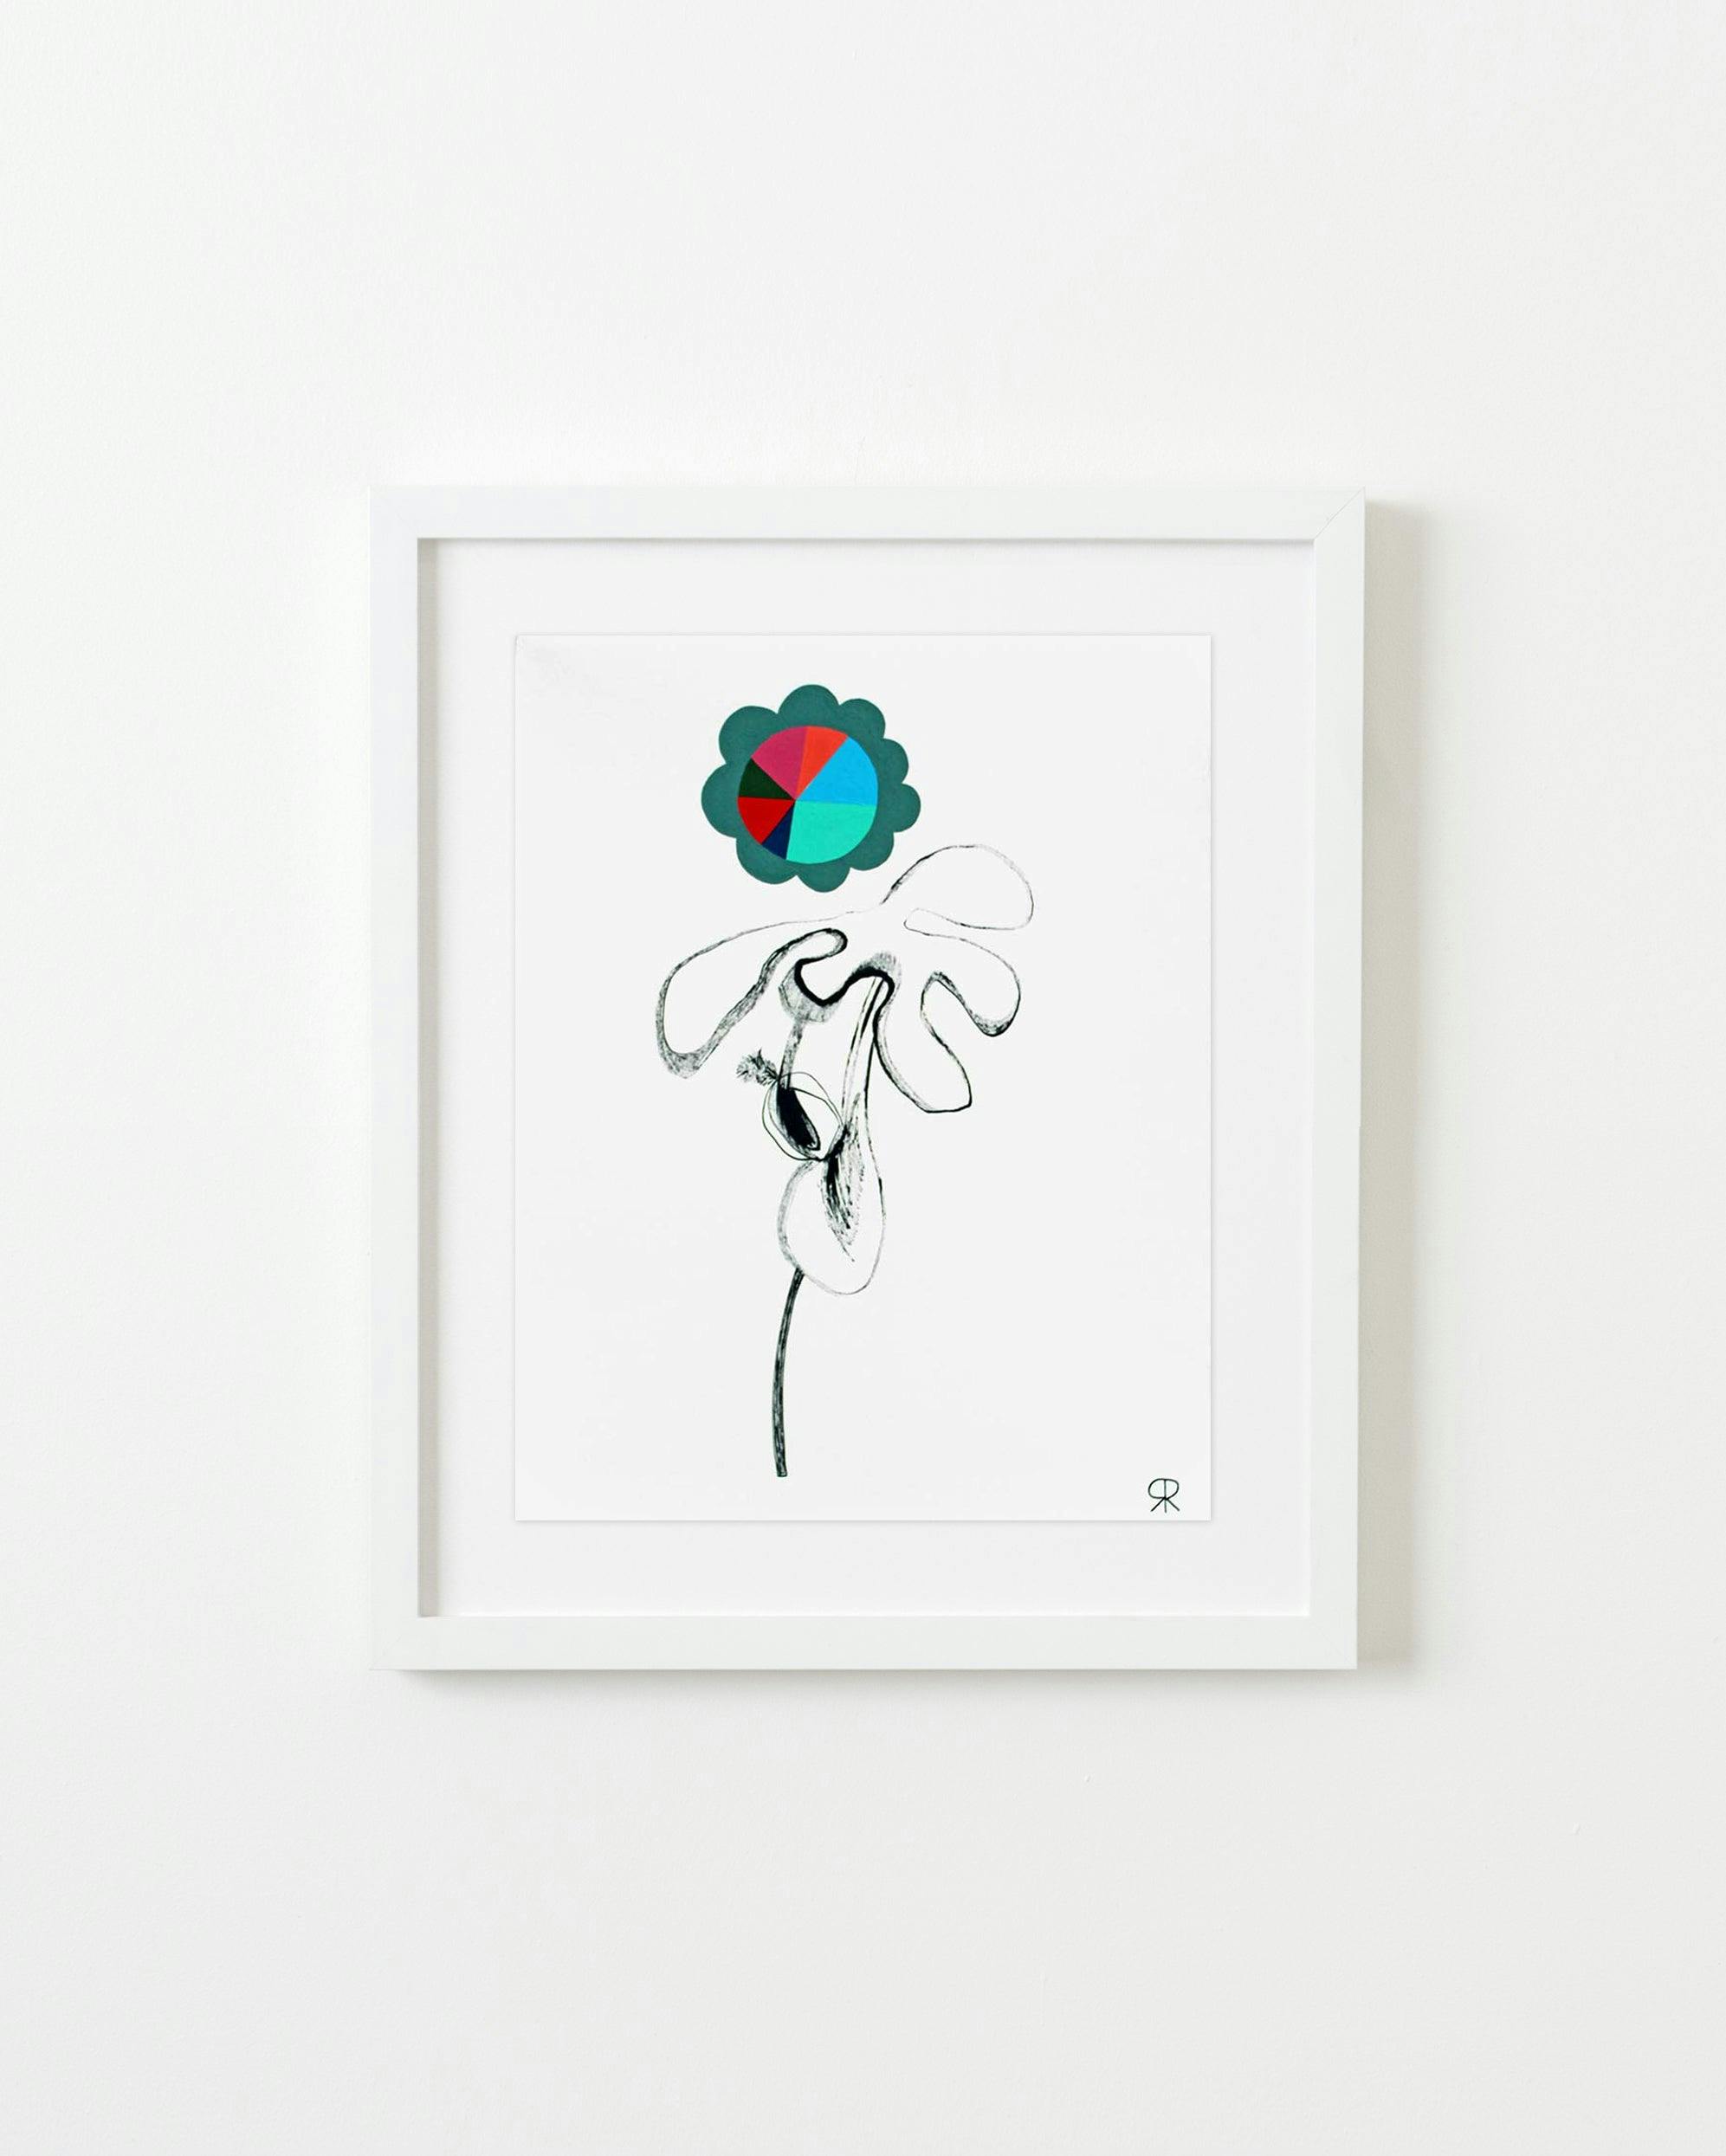 Drawing by Rebeca Raney titled "Flower Drawing #13".